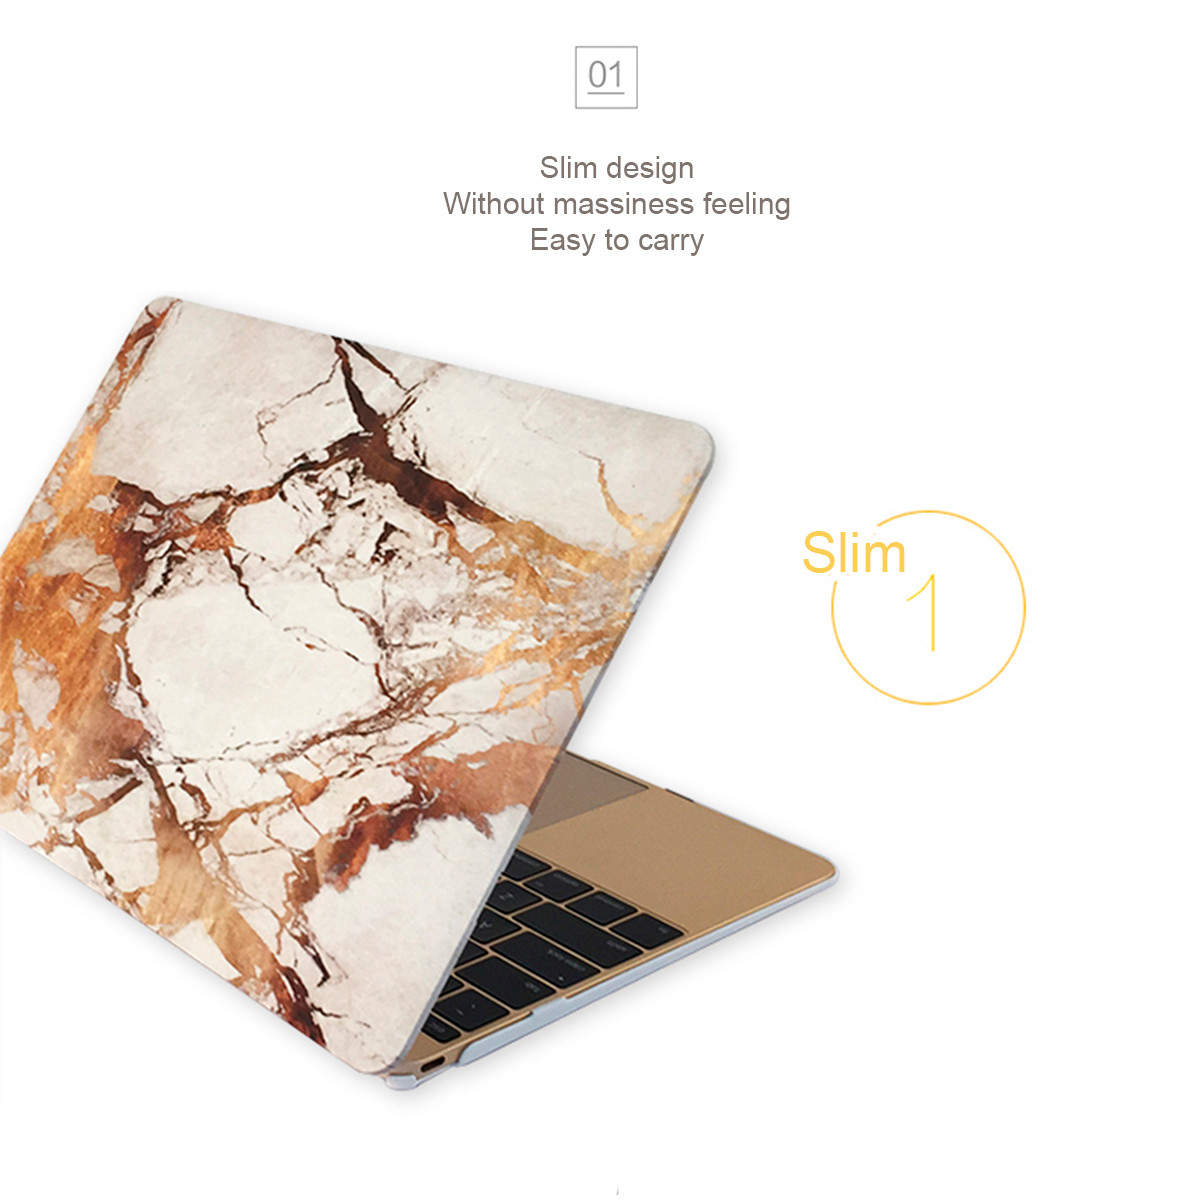 Marble Matte Hard Case Cover Shell For Macbook Air Pro 11 12 13 15 '' Retina